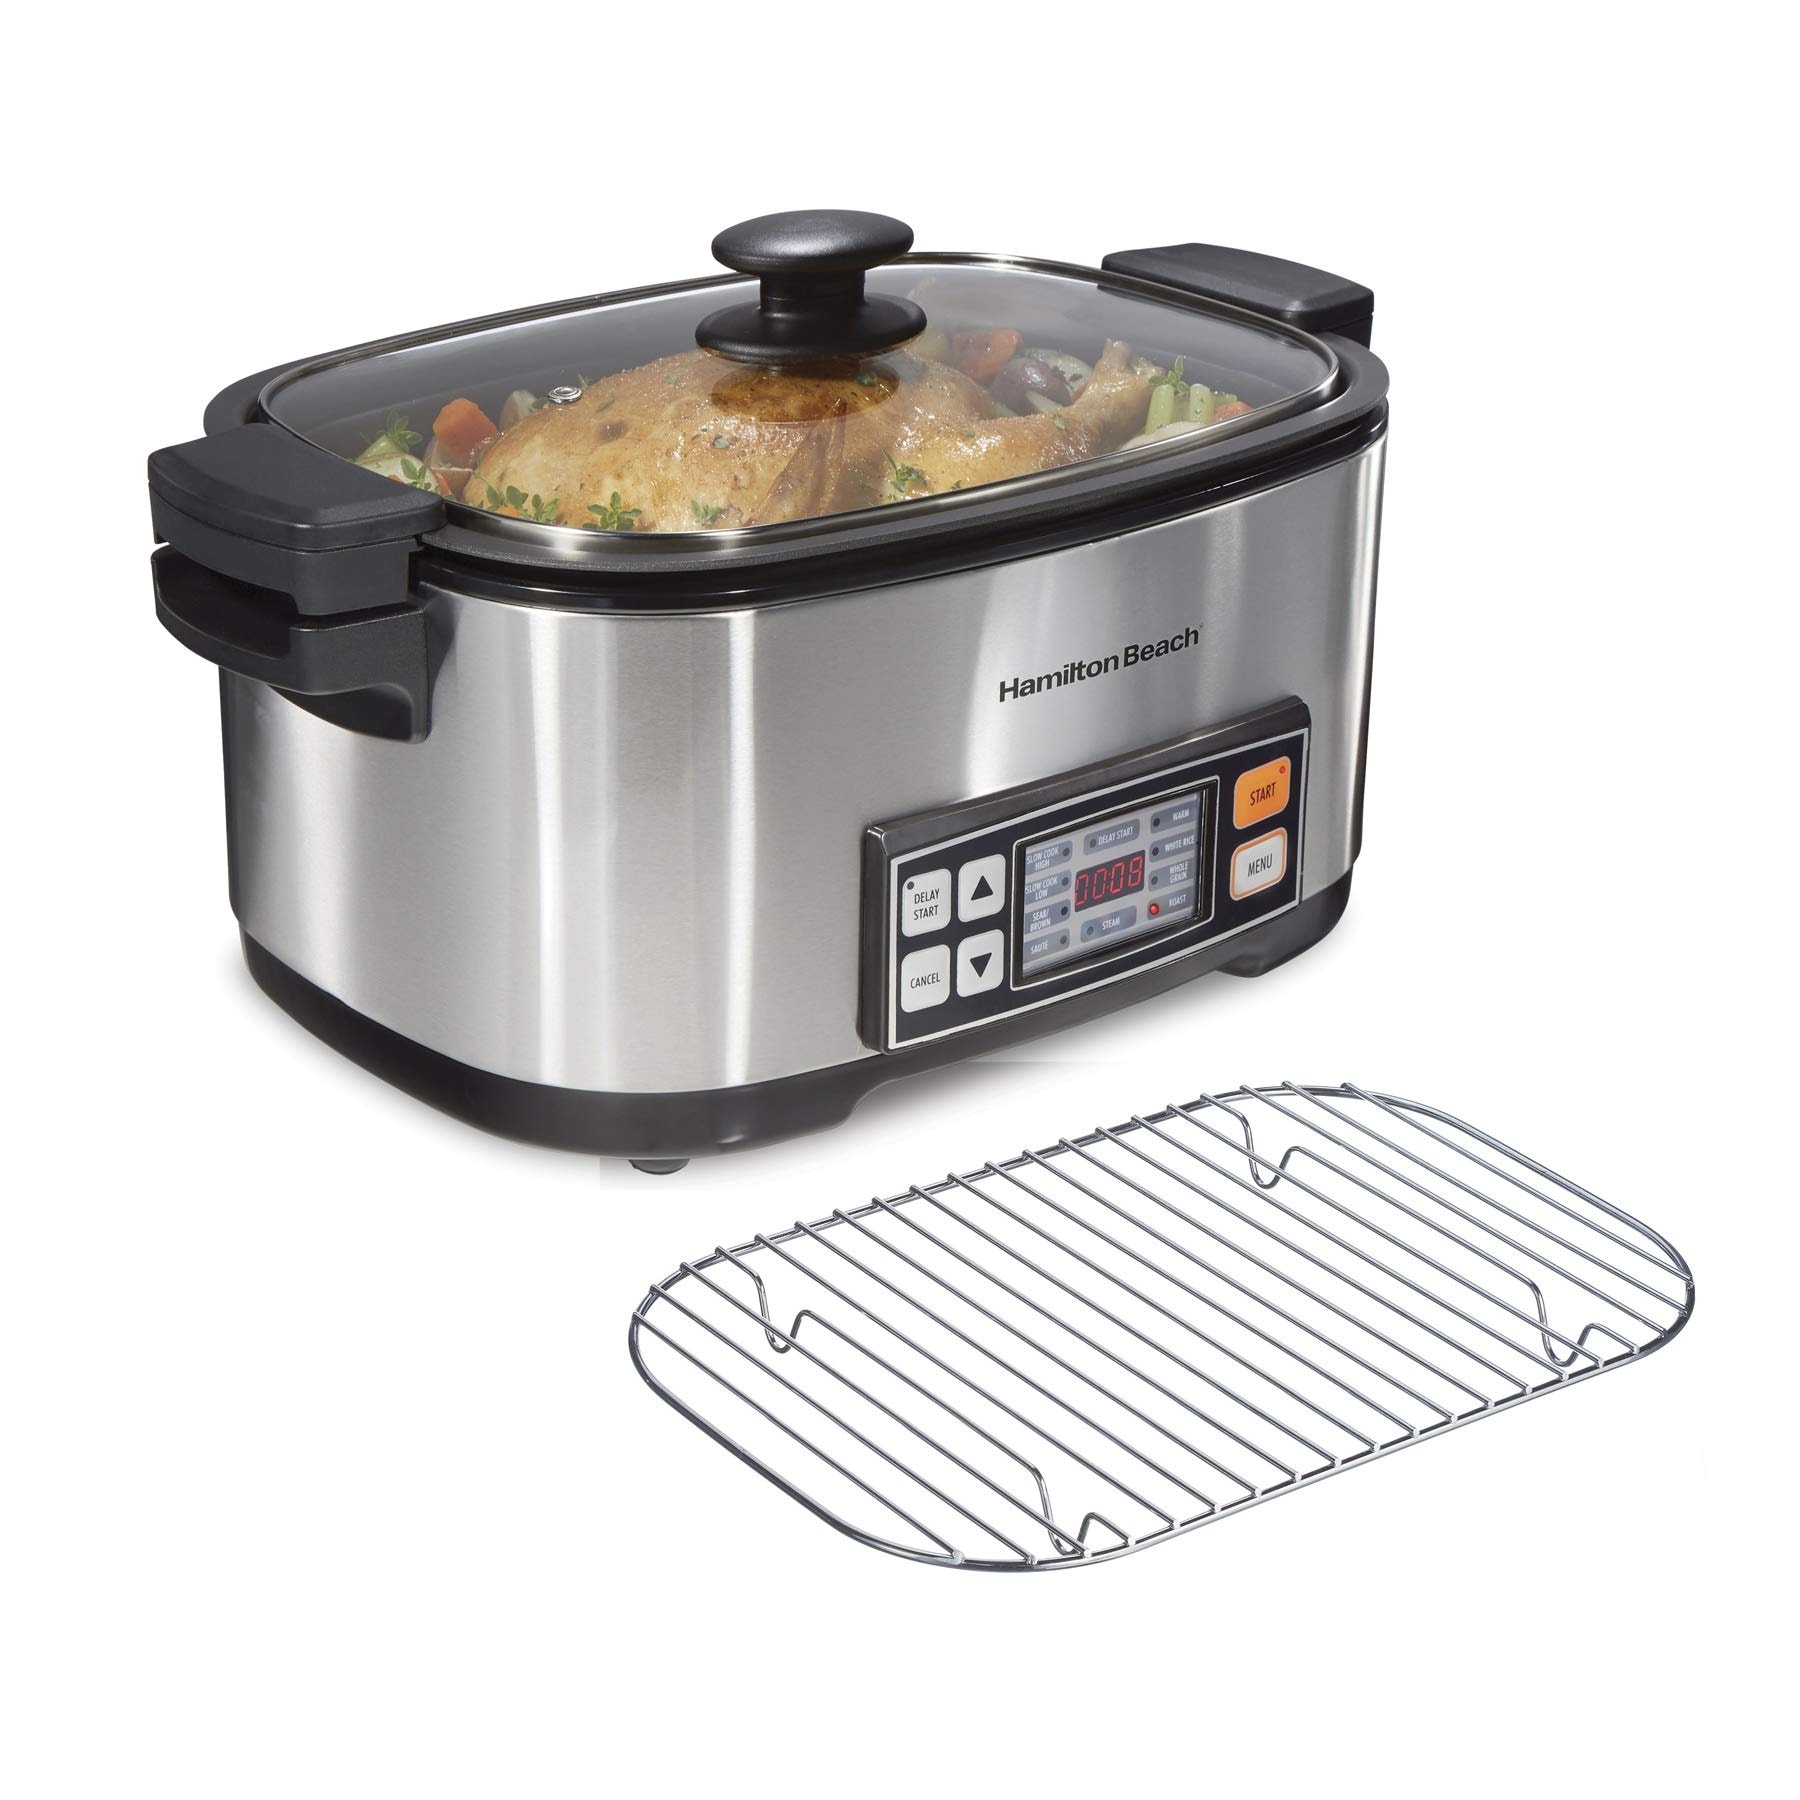 9-in-1 Digital Programmable Slow Cooker with 6 quart Nonstick Crock, Sear, Saute, Steam, Rice Functions, Stainless Steel